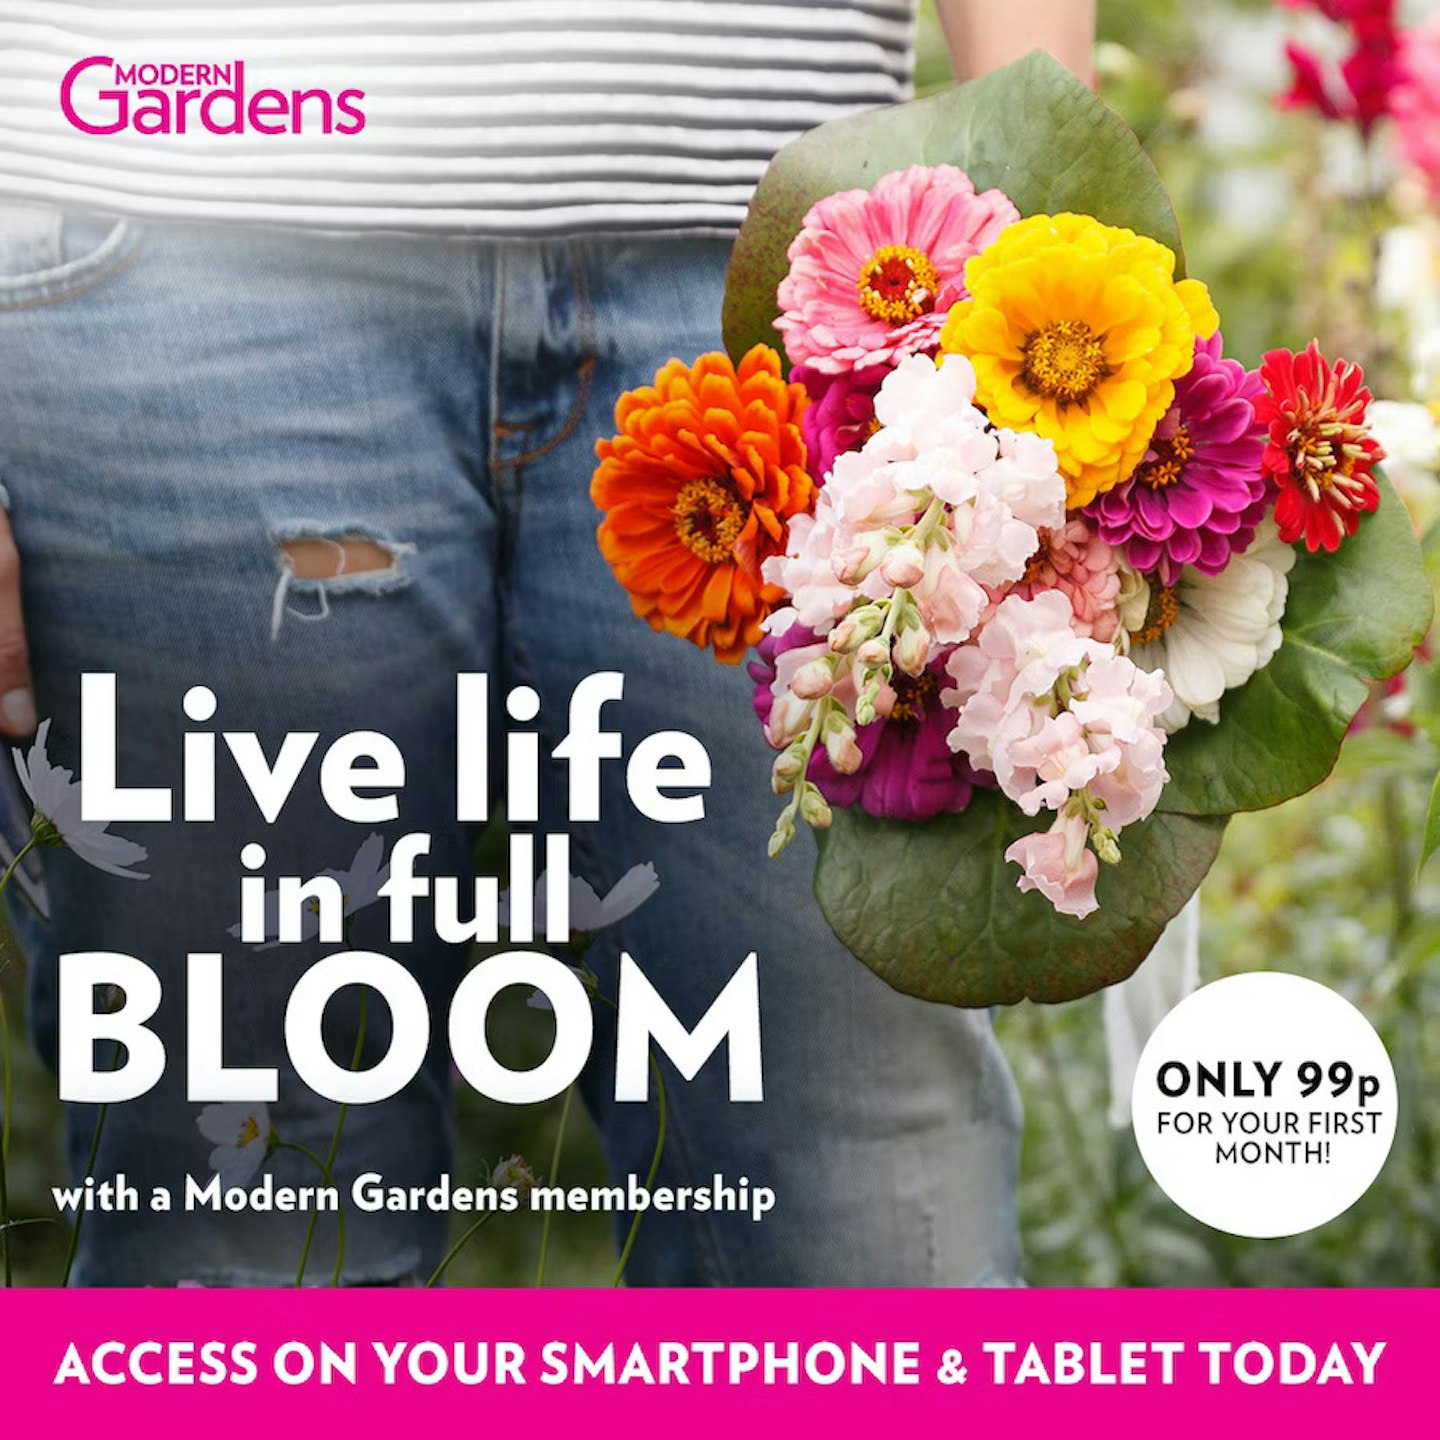 Make the most out of your outdoor space with a Modern Gardens Membership